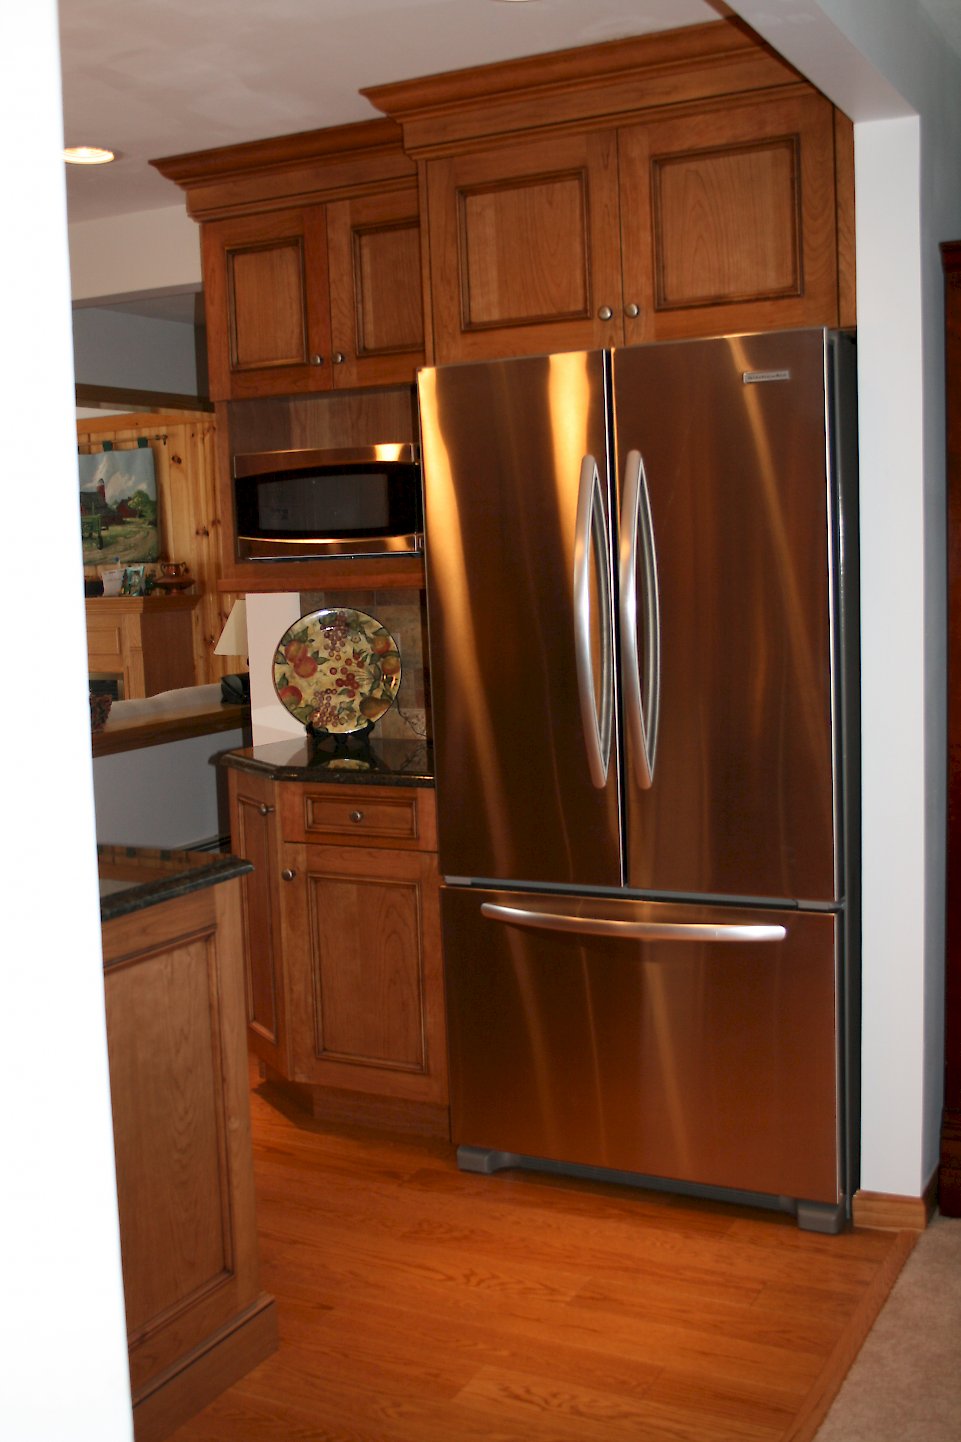 Closer view of the Refrigerator and GE microwave.